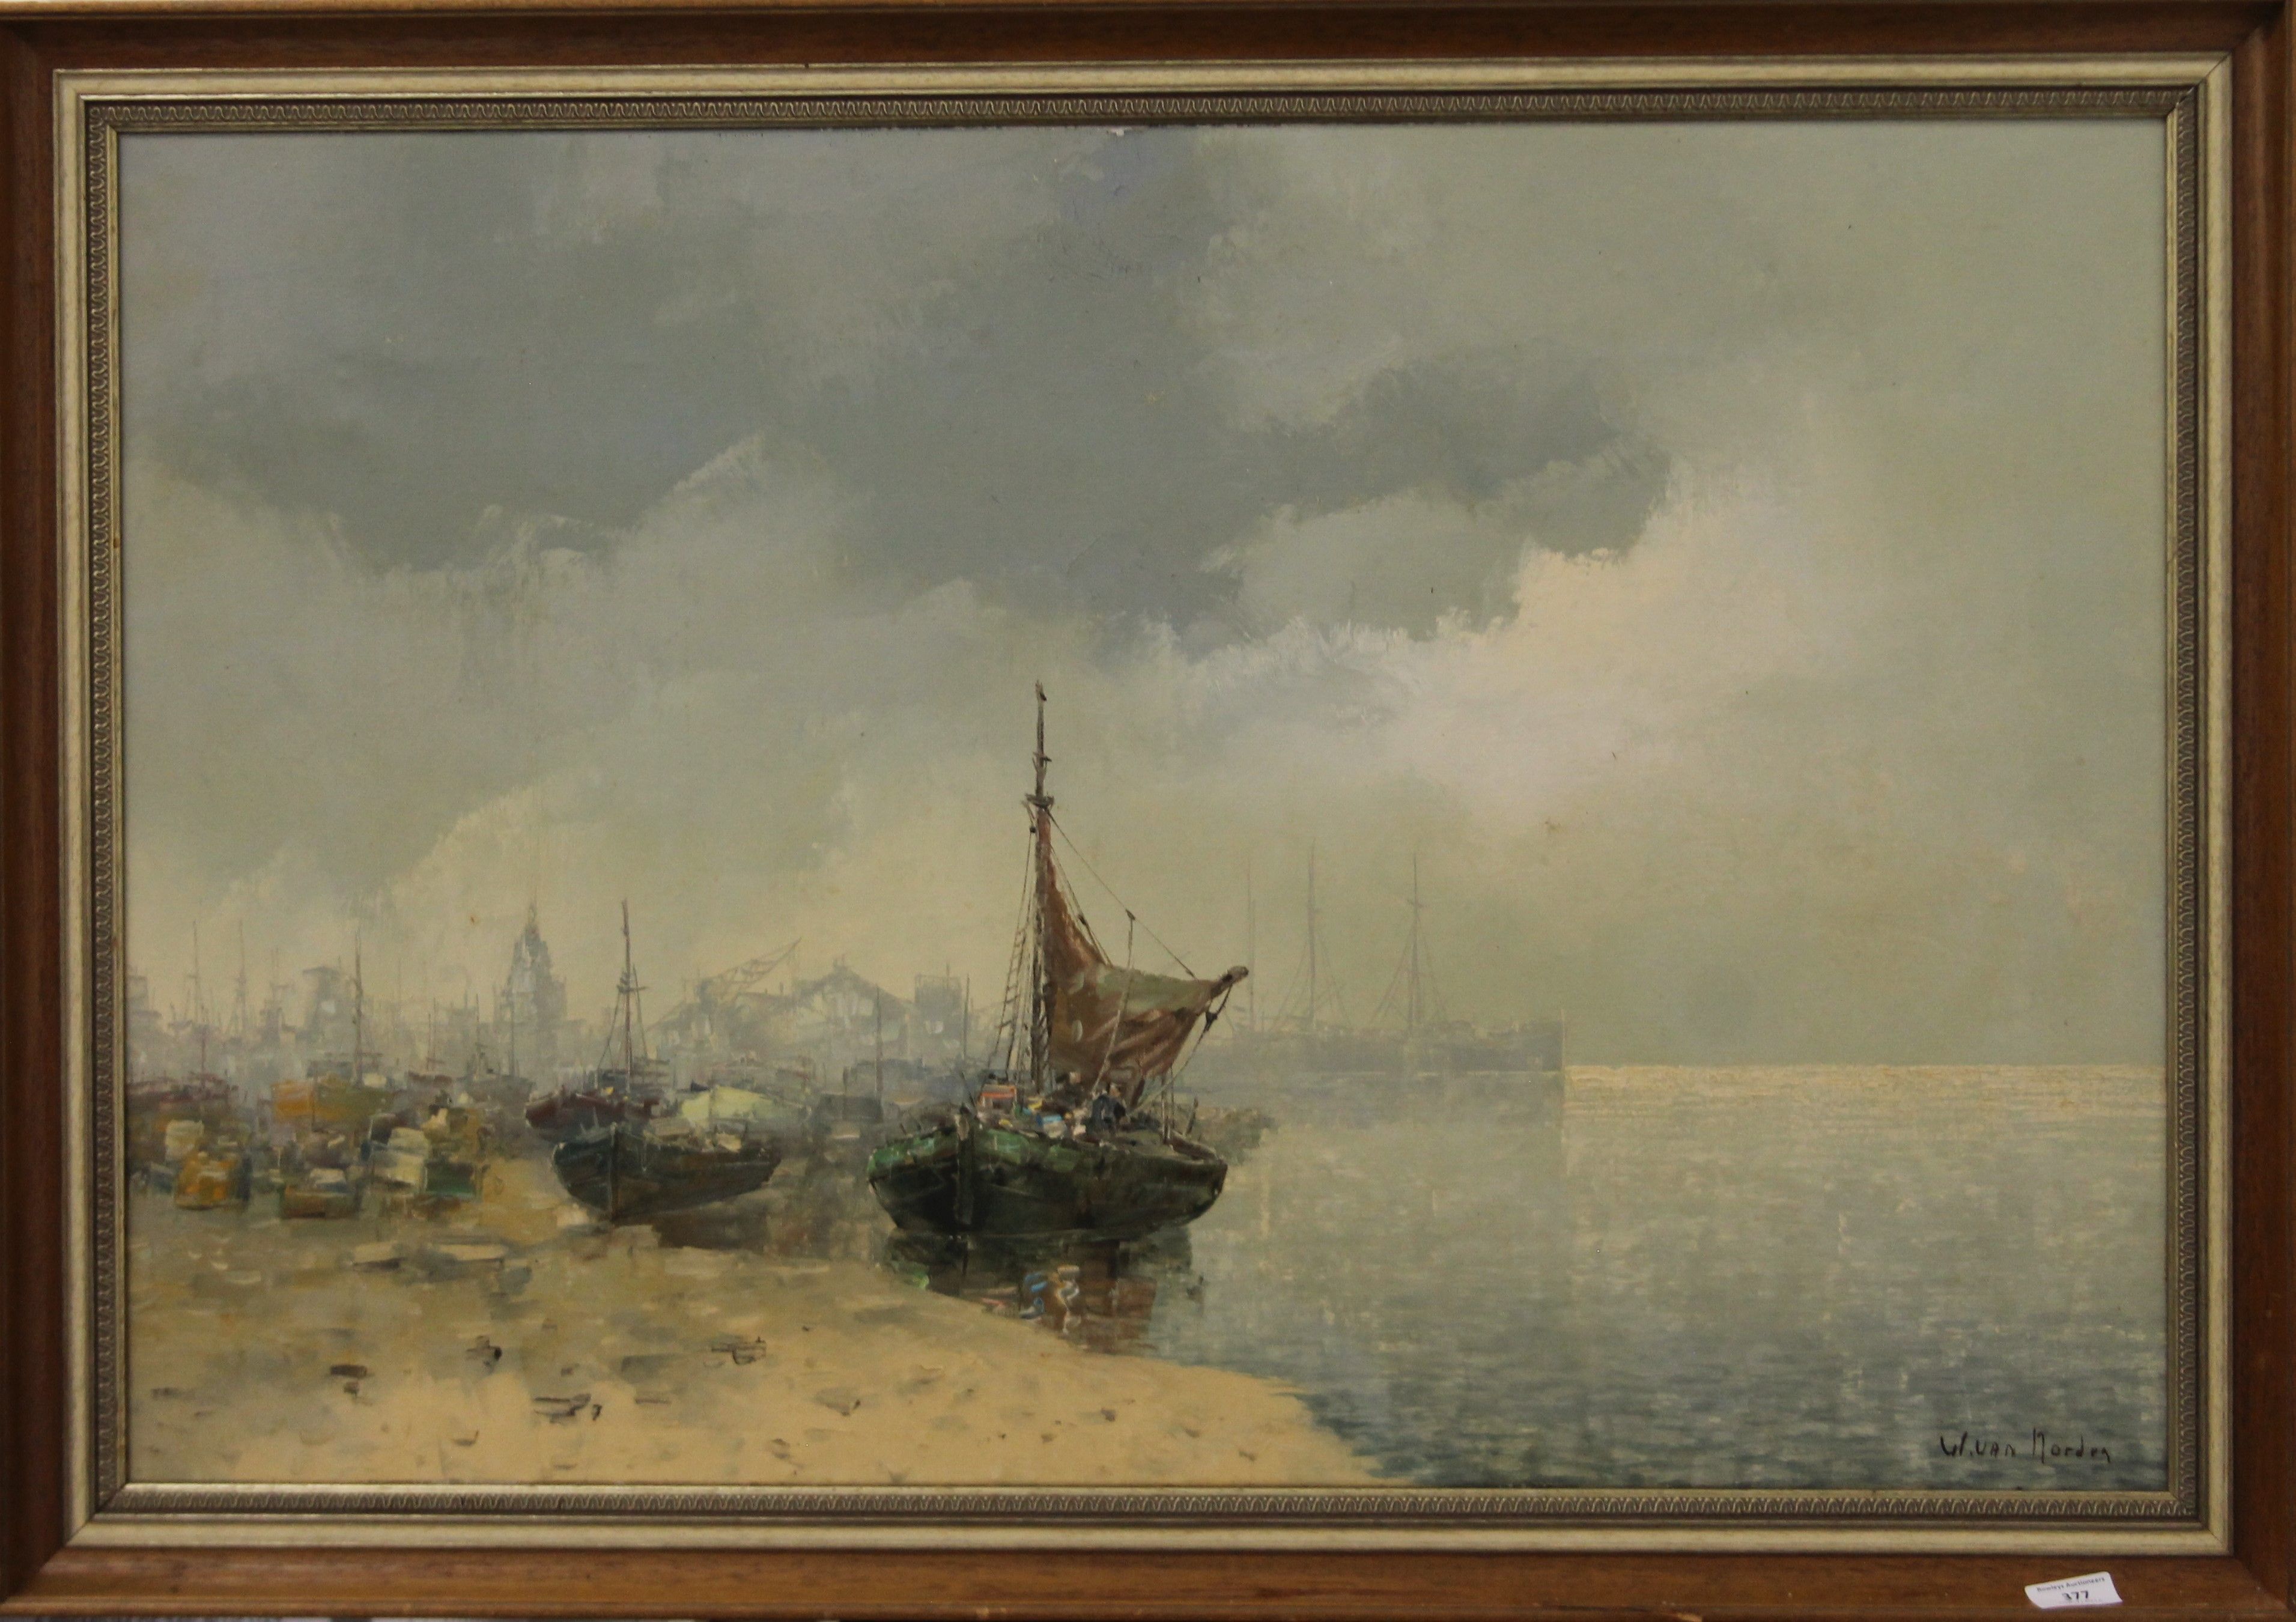 W VAN NORDEN, Ship in a Harbour, oil on canvas, framed. - Image 2 of 5